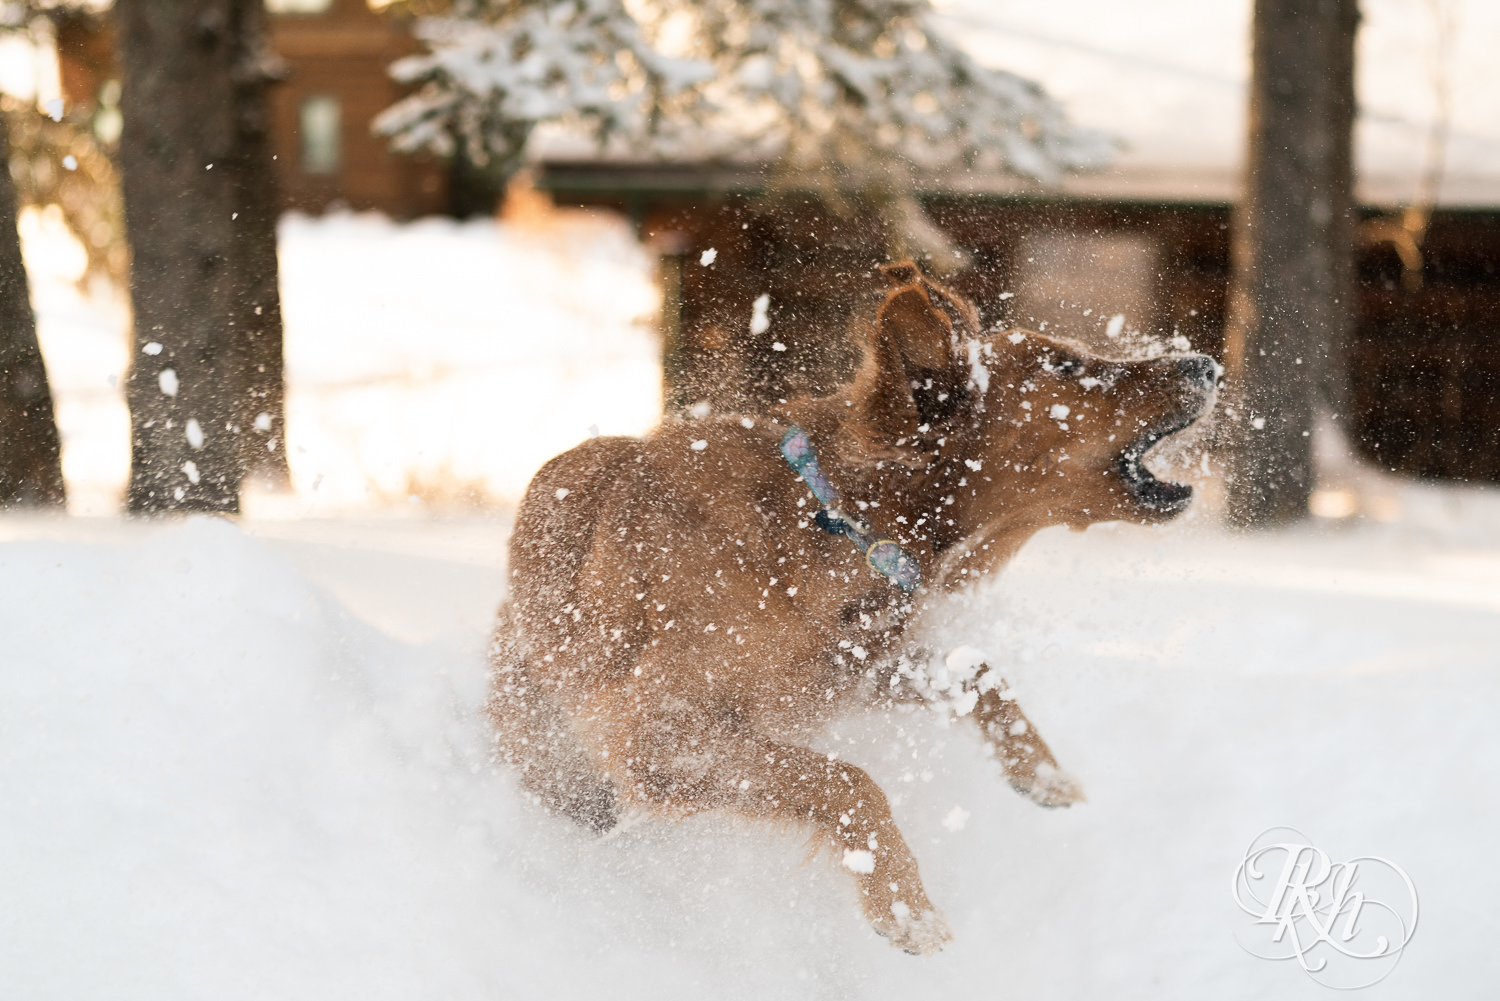 Golden Retriever playing in the snow at Grand Superior Lodge in Two Harbors, Minnesota.